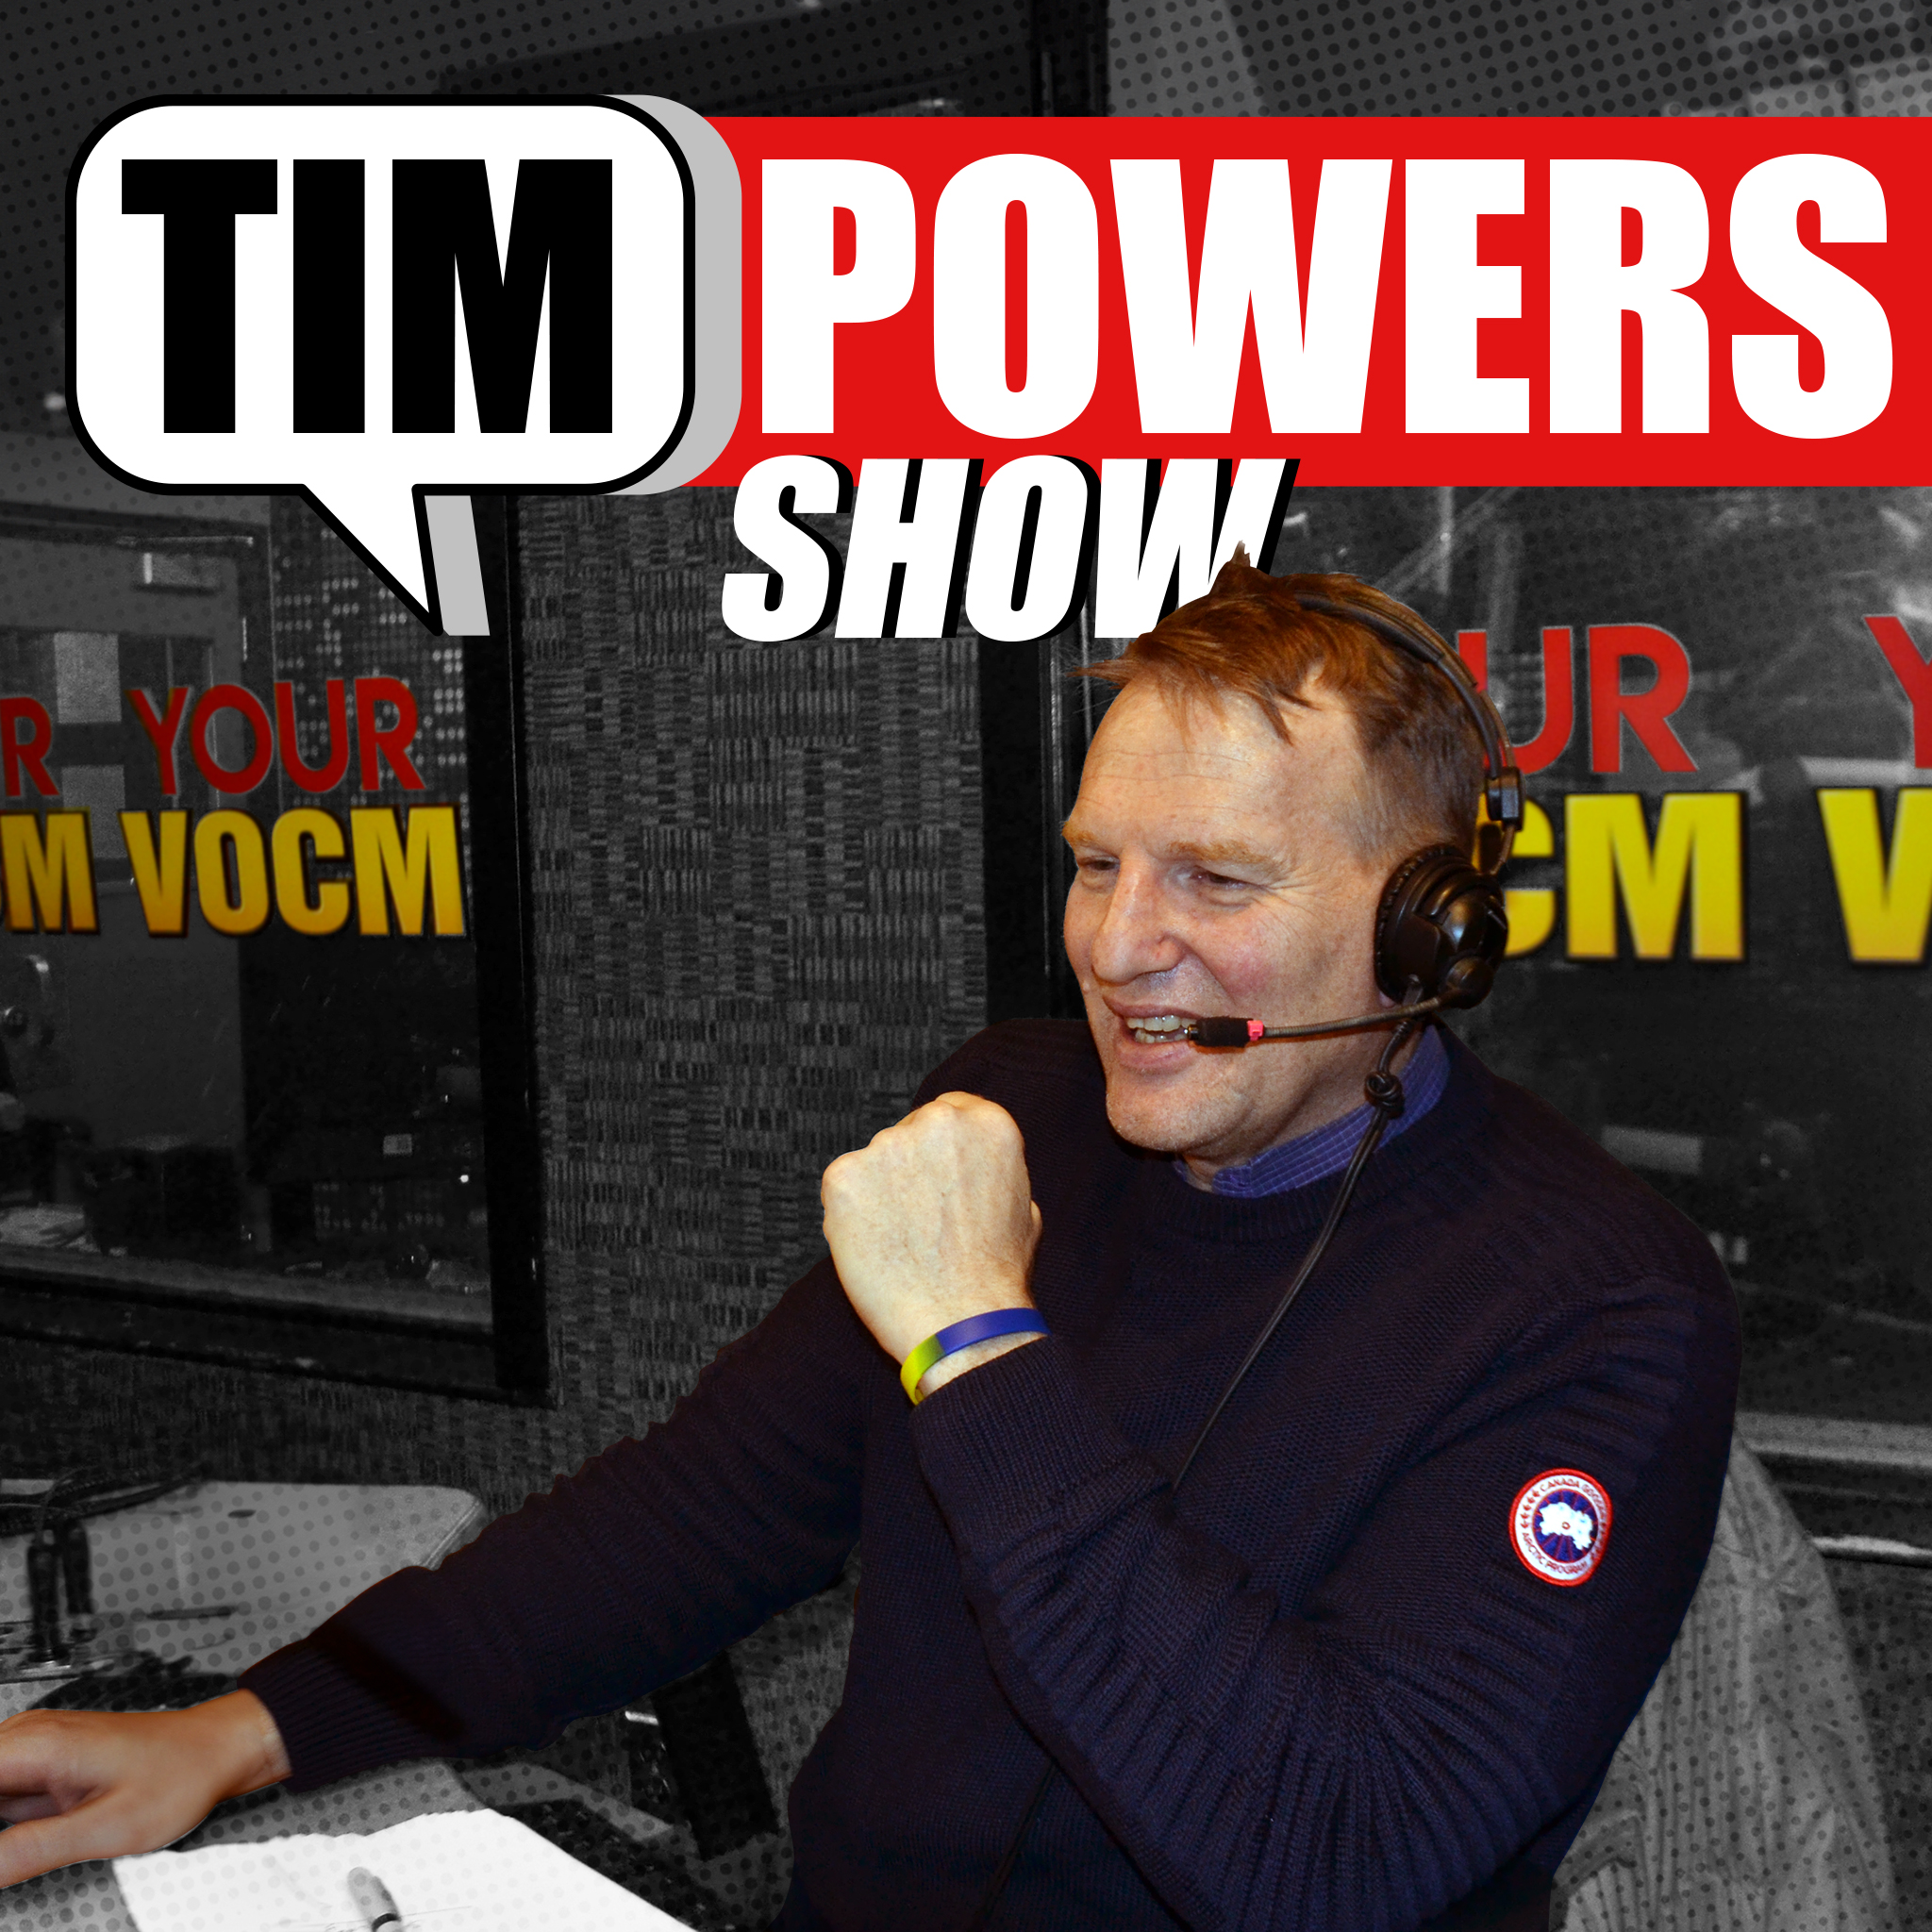 The Tim Powers Show, Wednesday May 8th